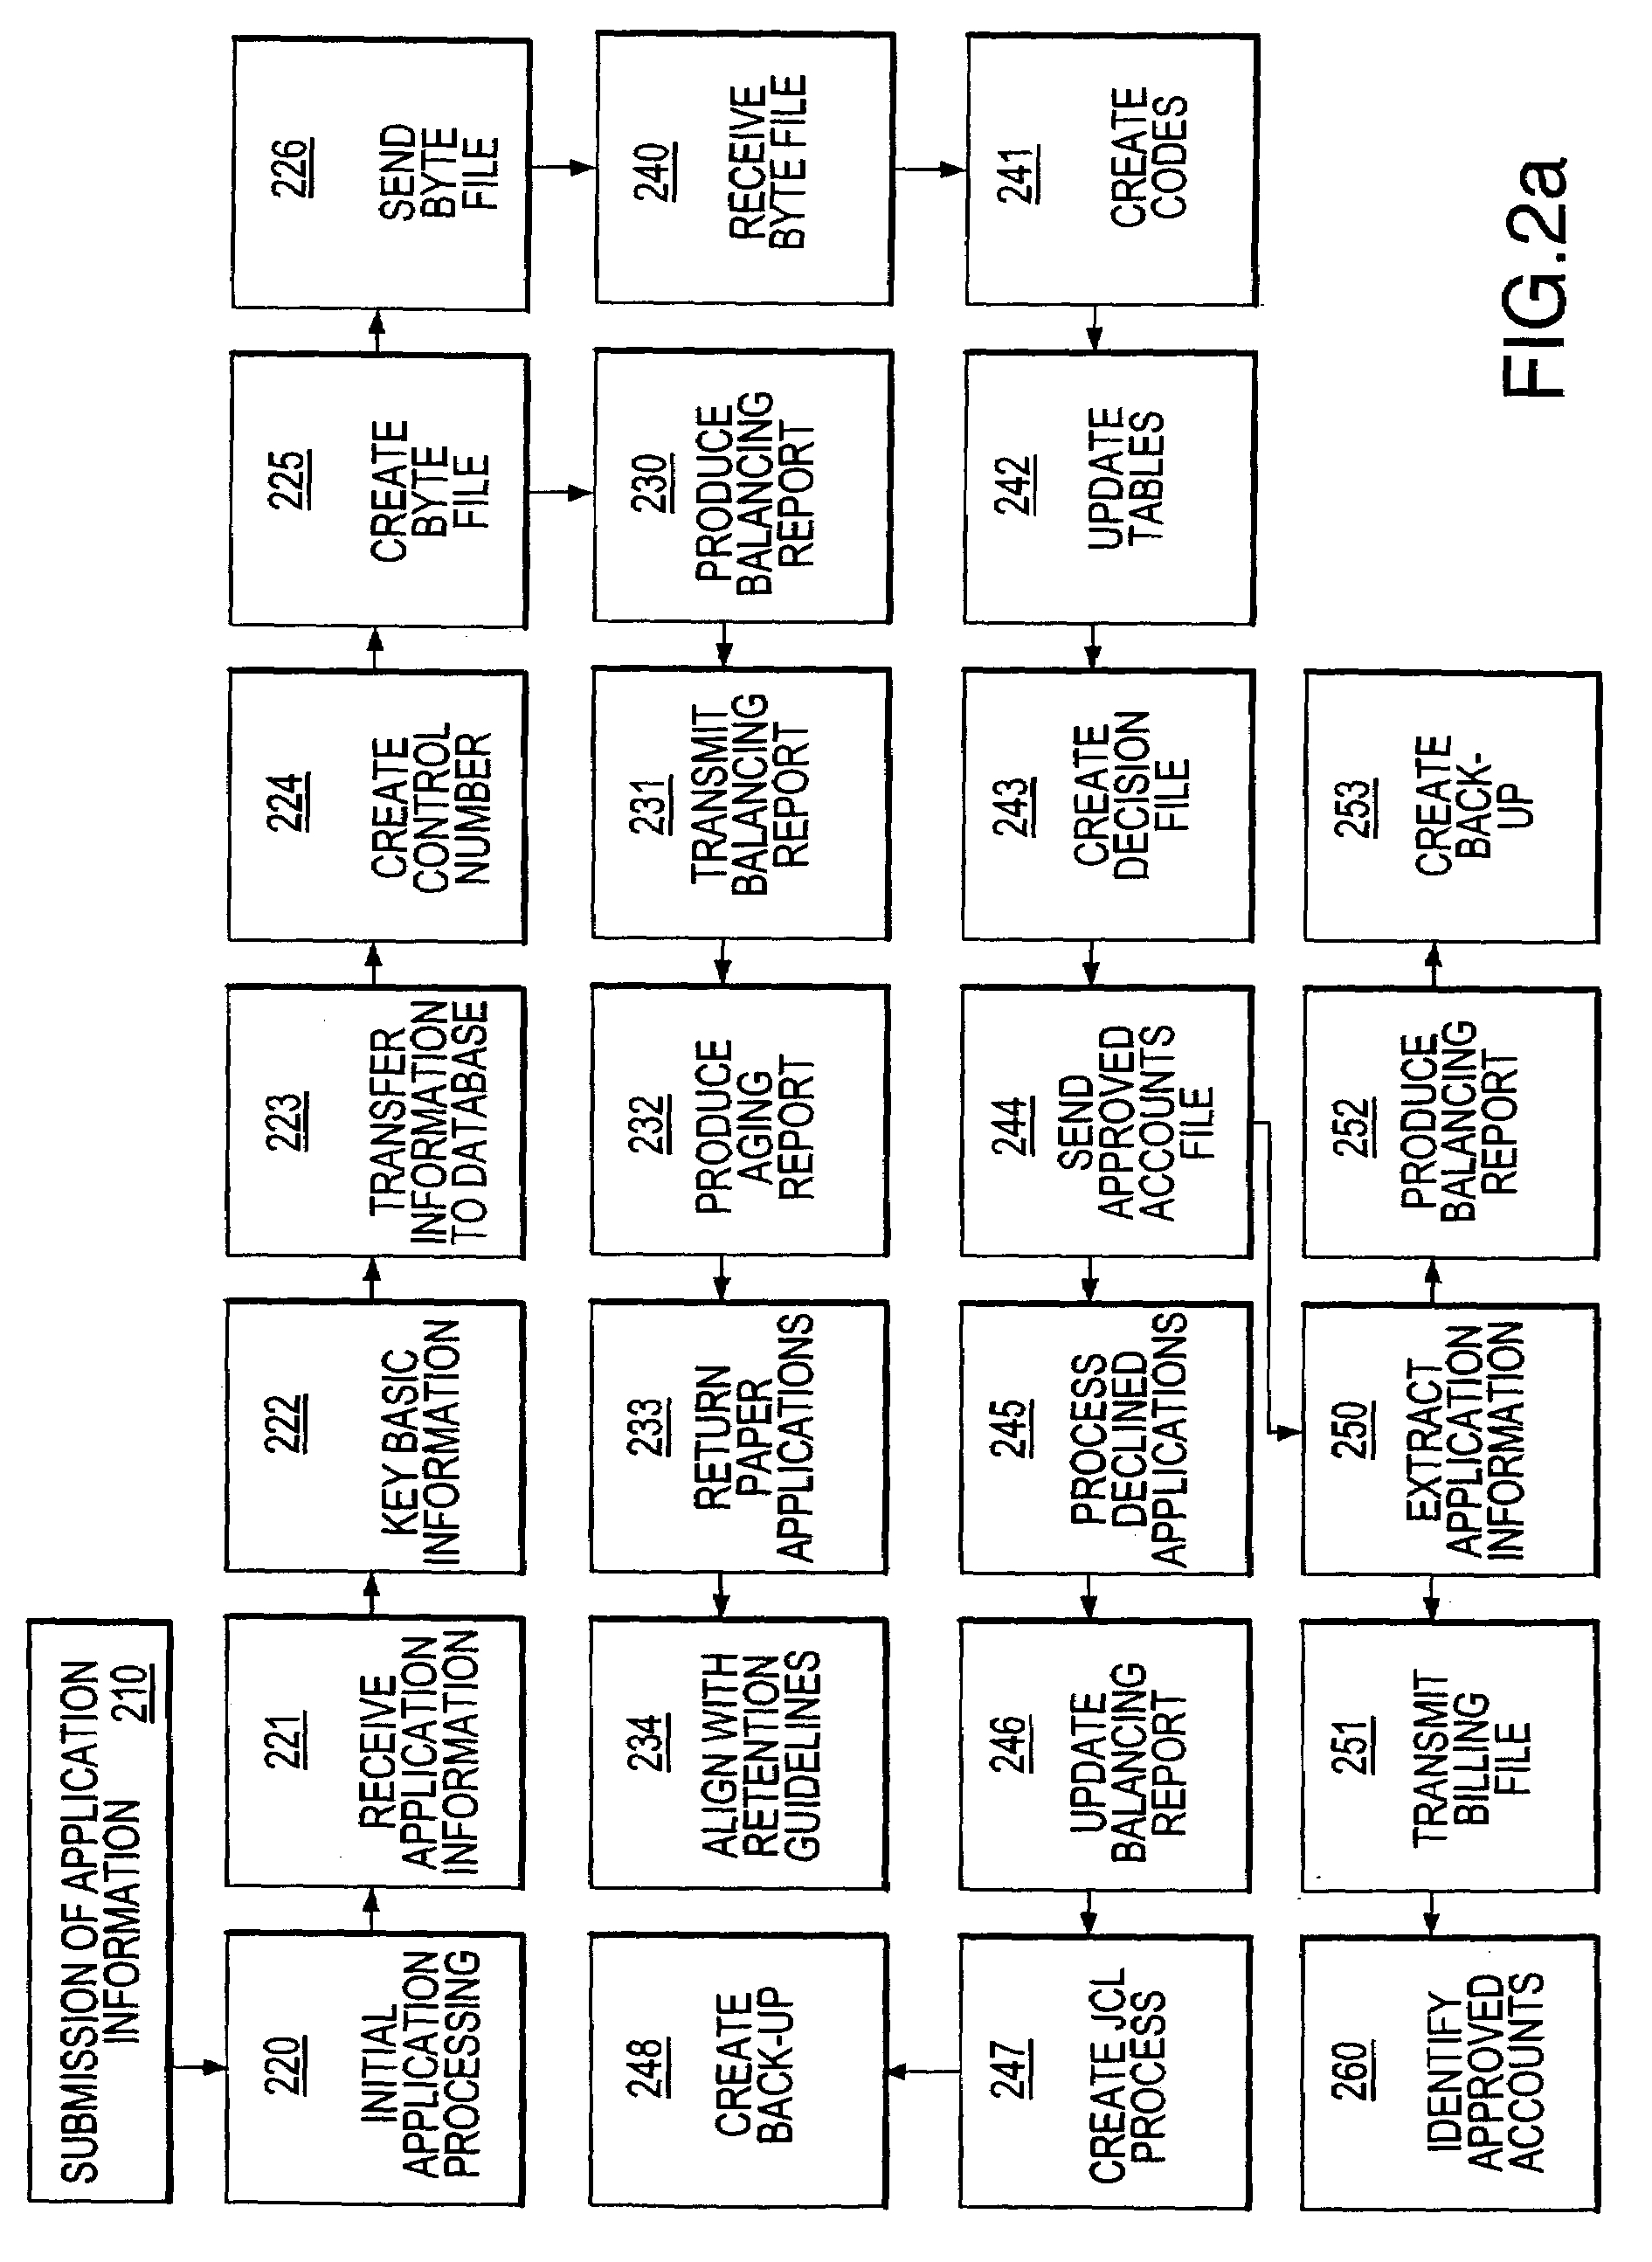 Public/private dual card system and method